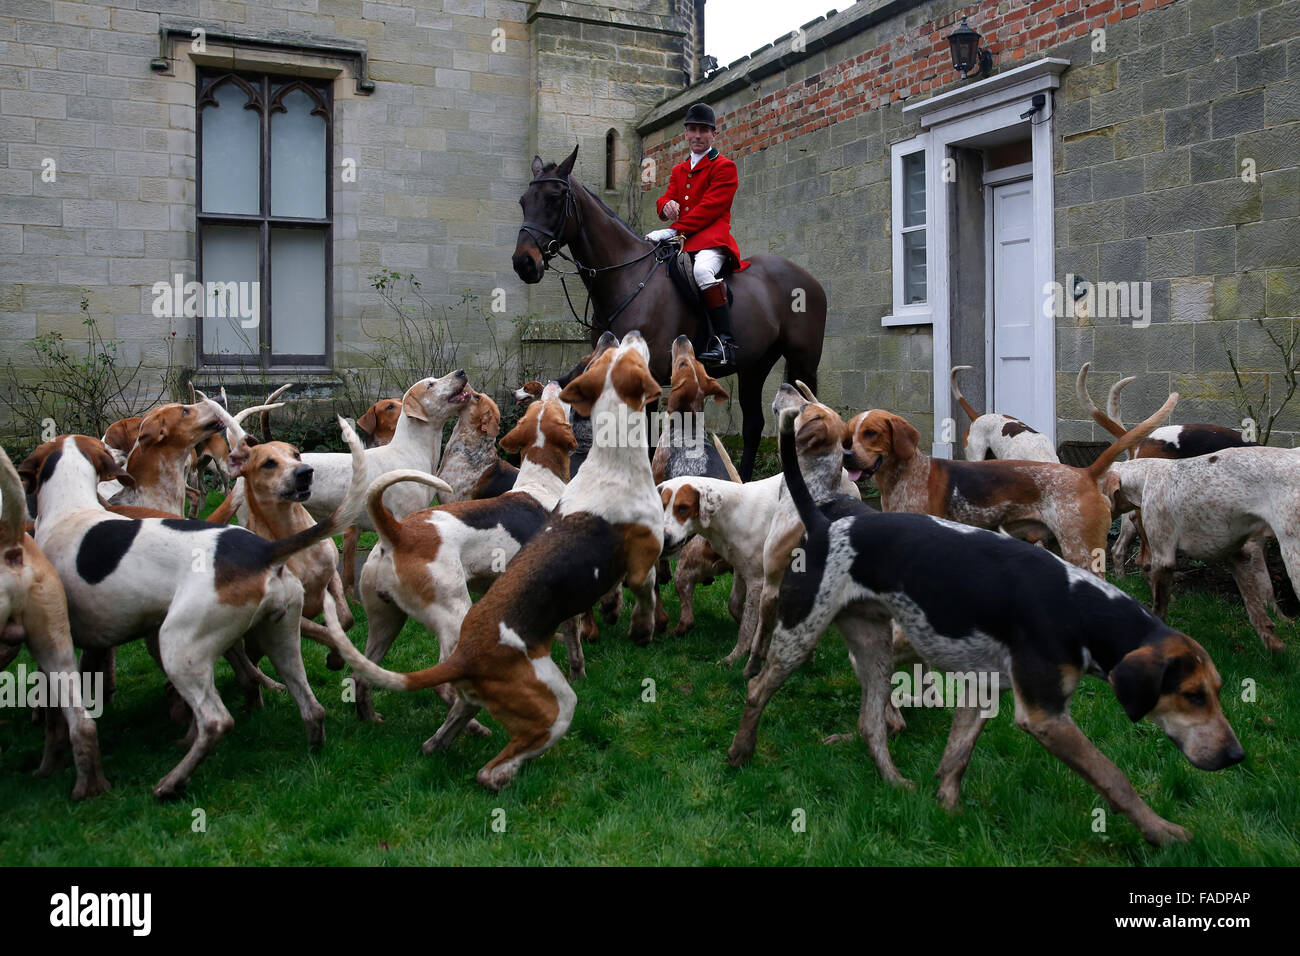 The hounds jump for biscuits as members of the Old Surrey Burstow and West Kent Hunt gather at Chiddingstone Castle for the annu Stock Photo